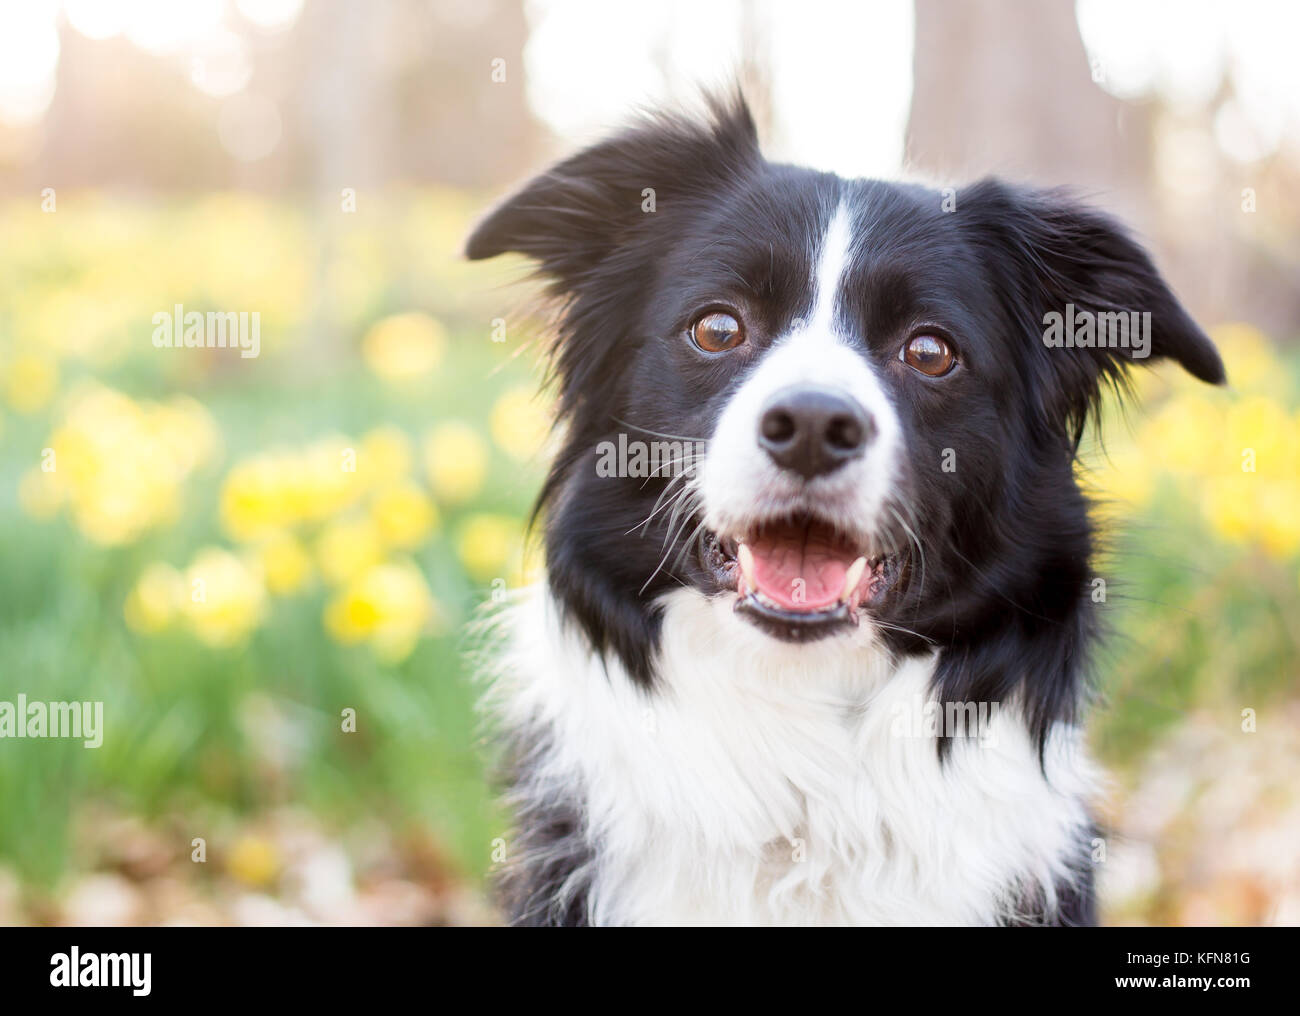 Border Collie dog outdoors with daffodils Stock Photo